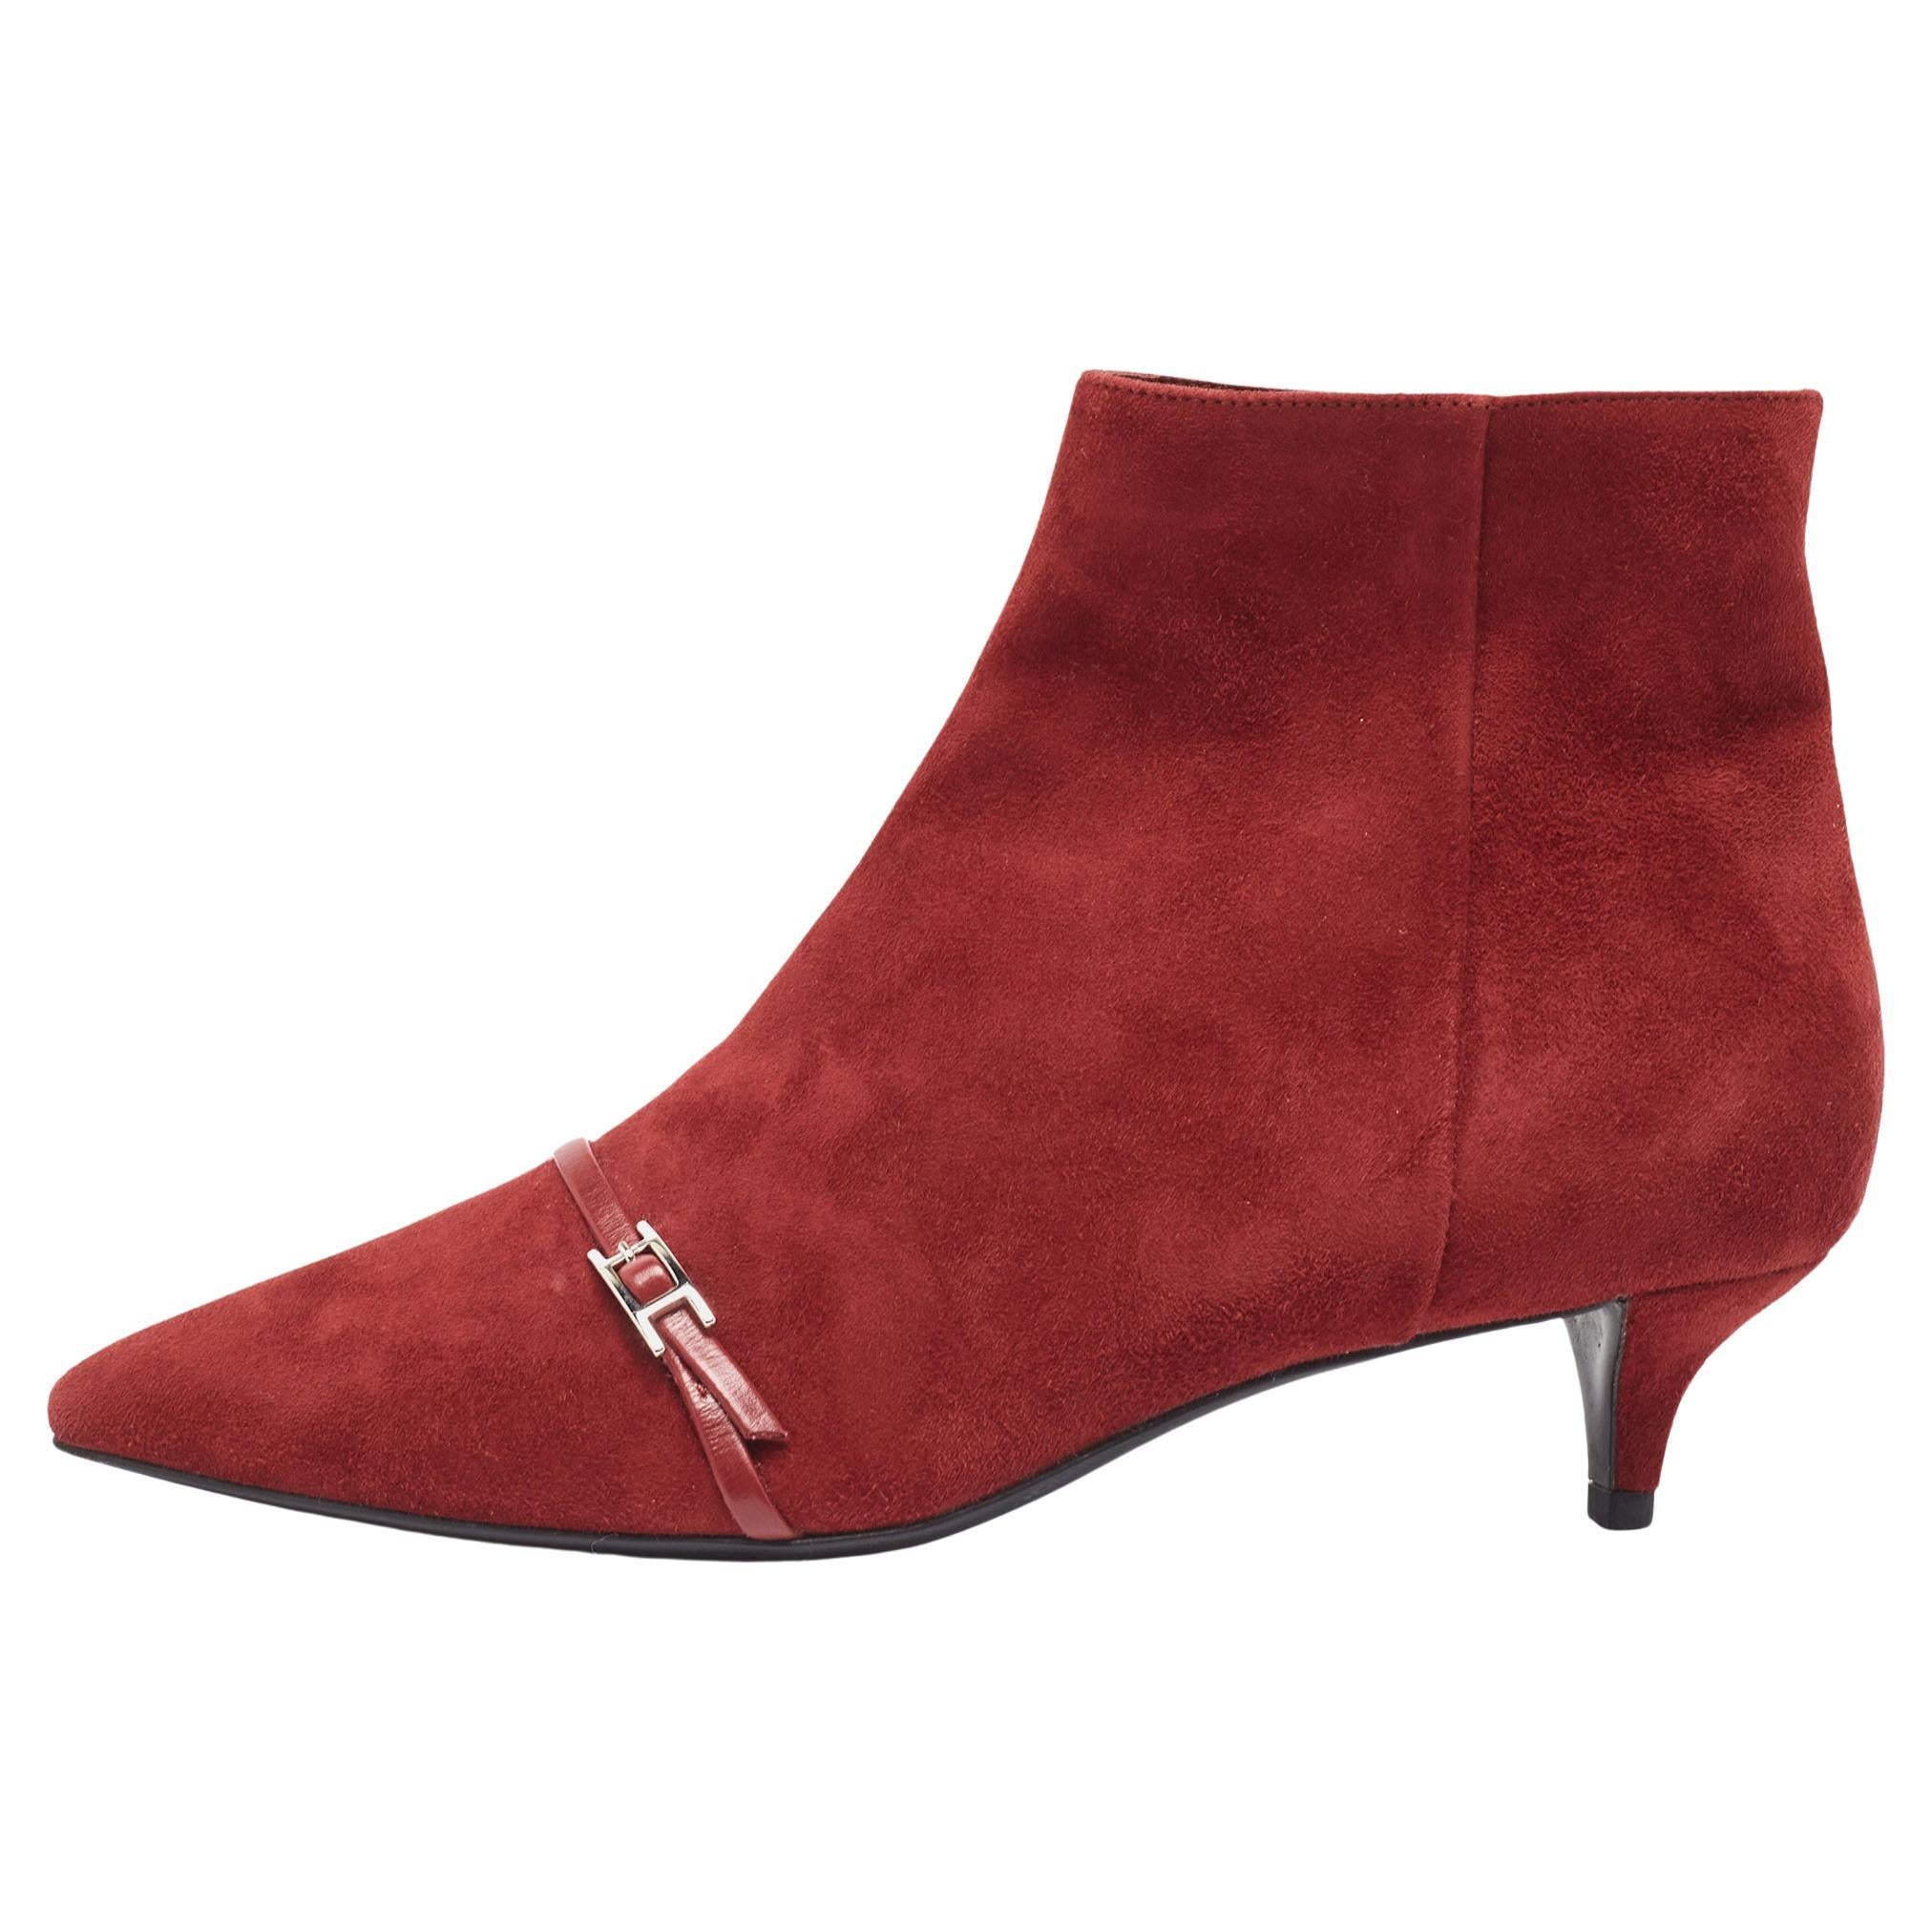 Hermès Dark Red Suede Ankle Booties Size 38 For Sale